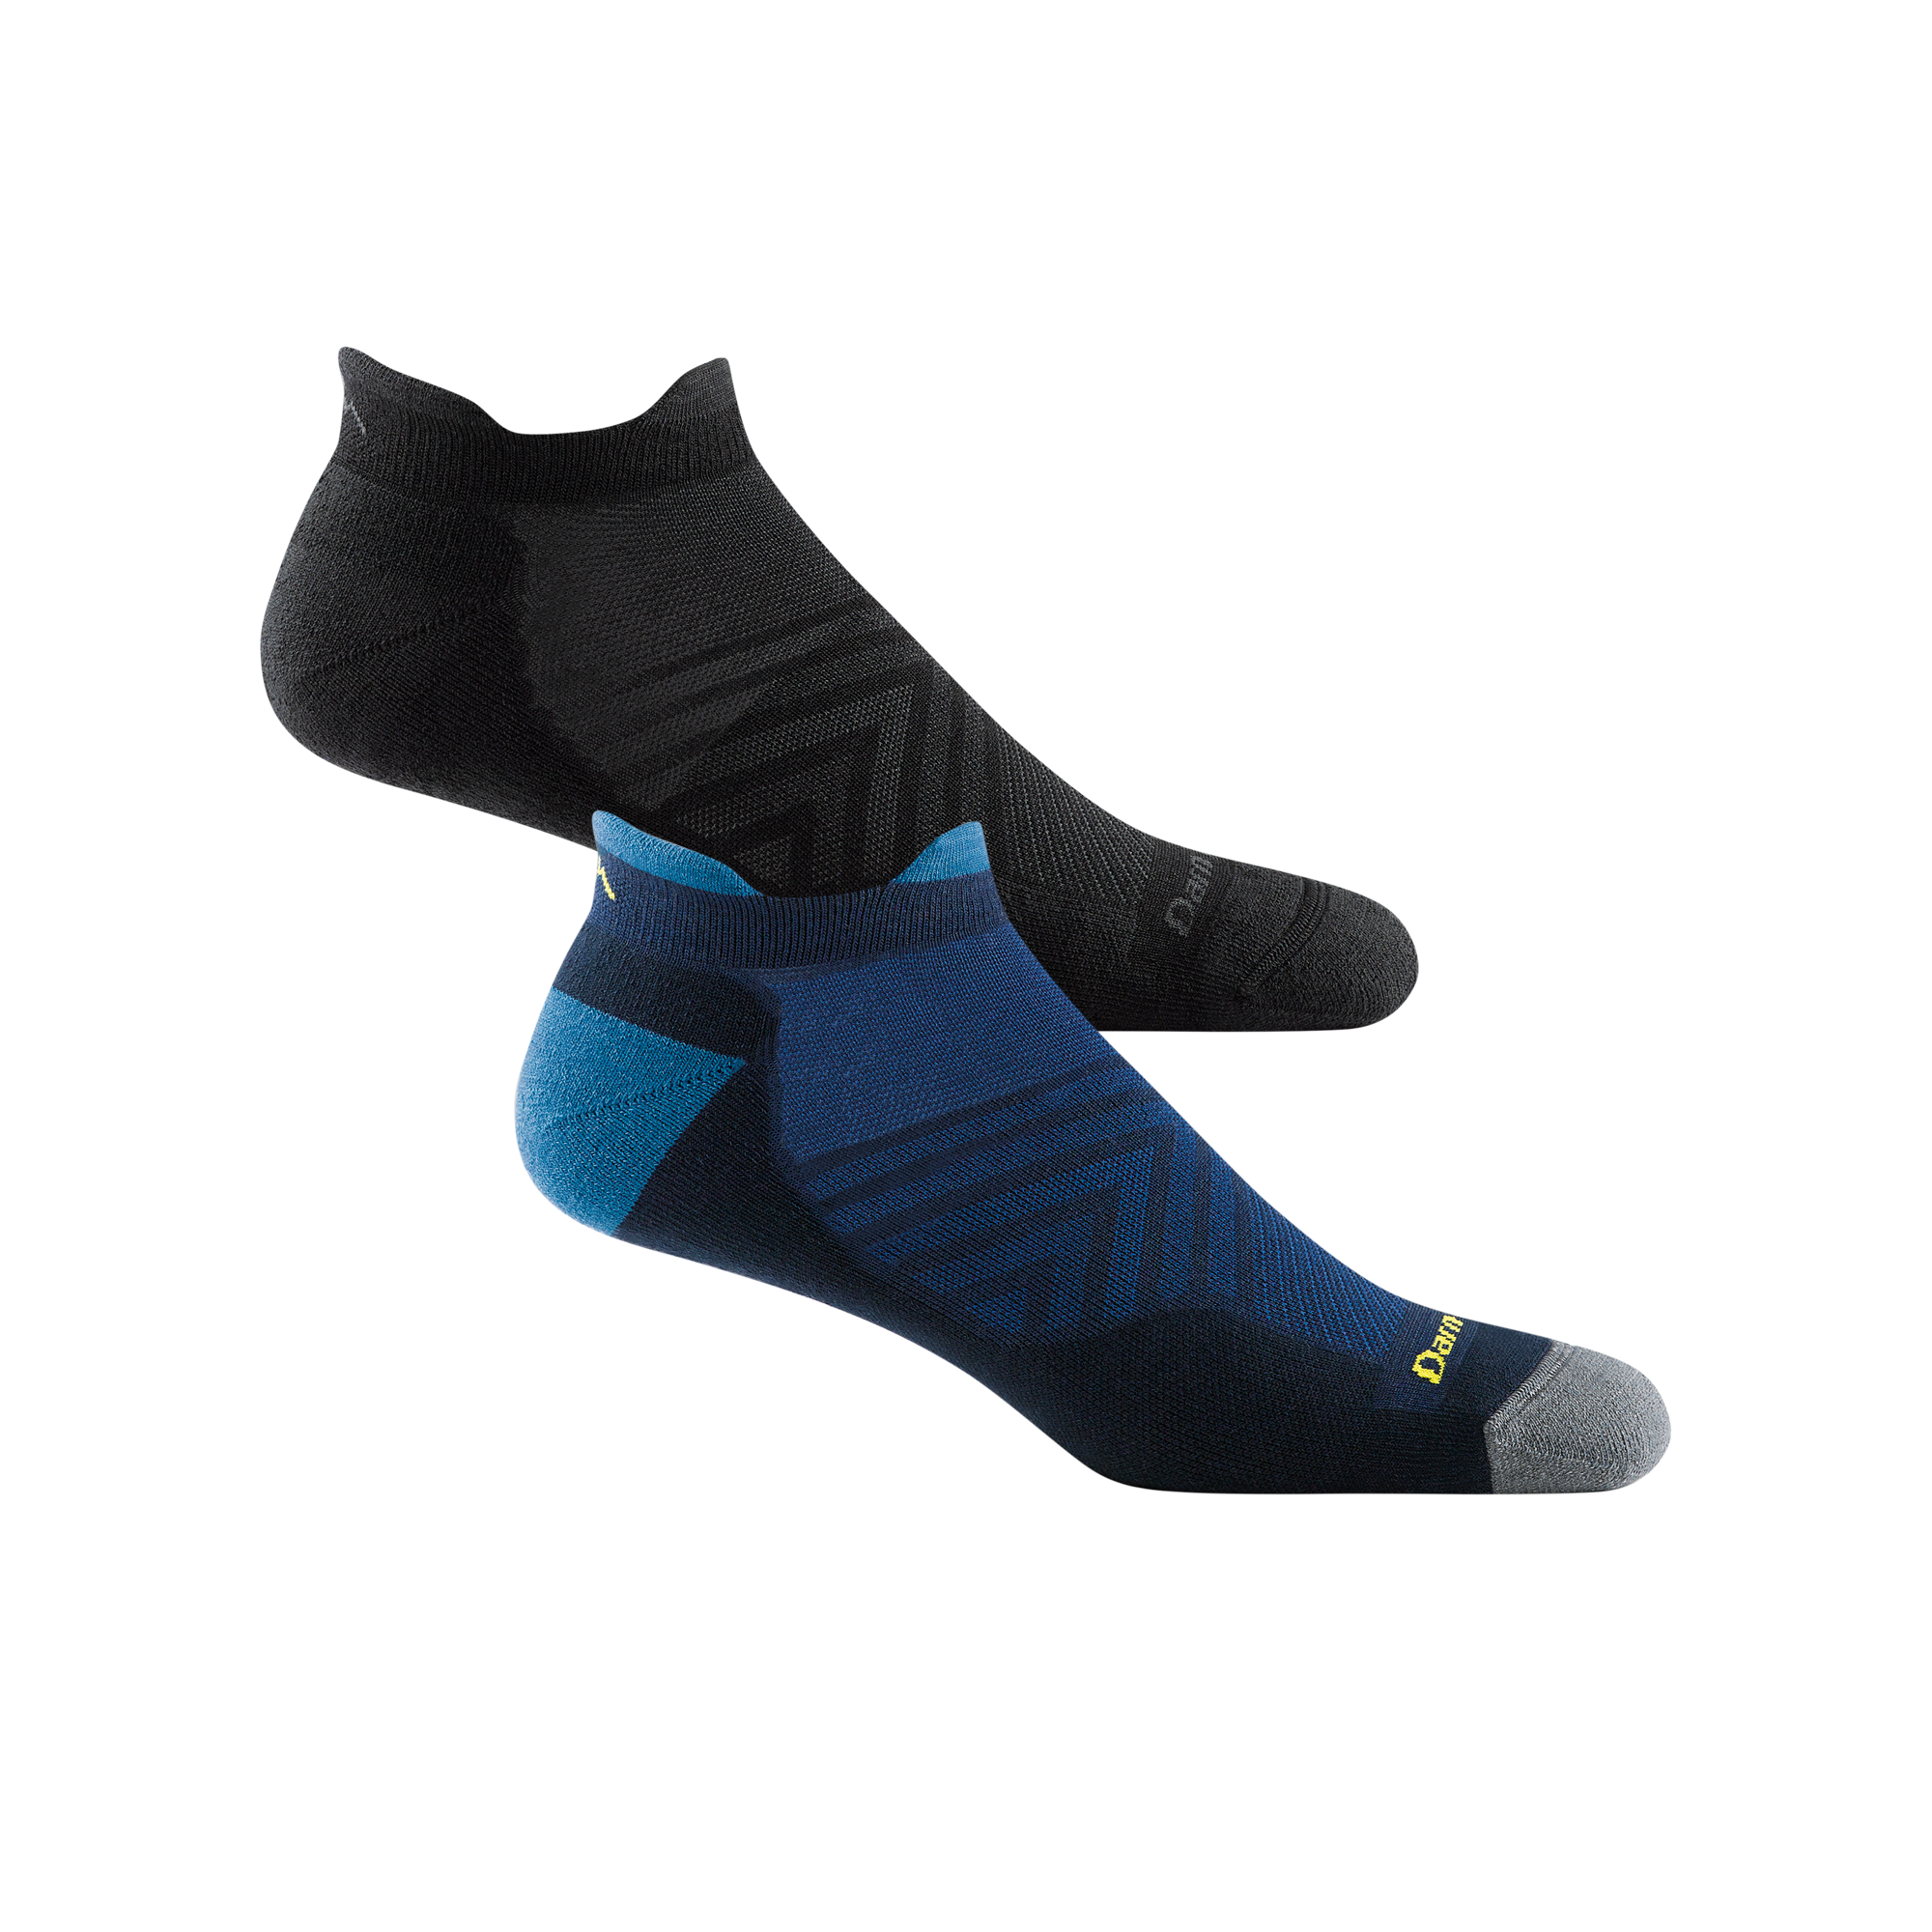 side by side image of the men's 1039 no-show running socks in Eclipse and black